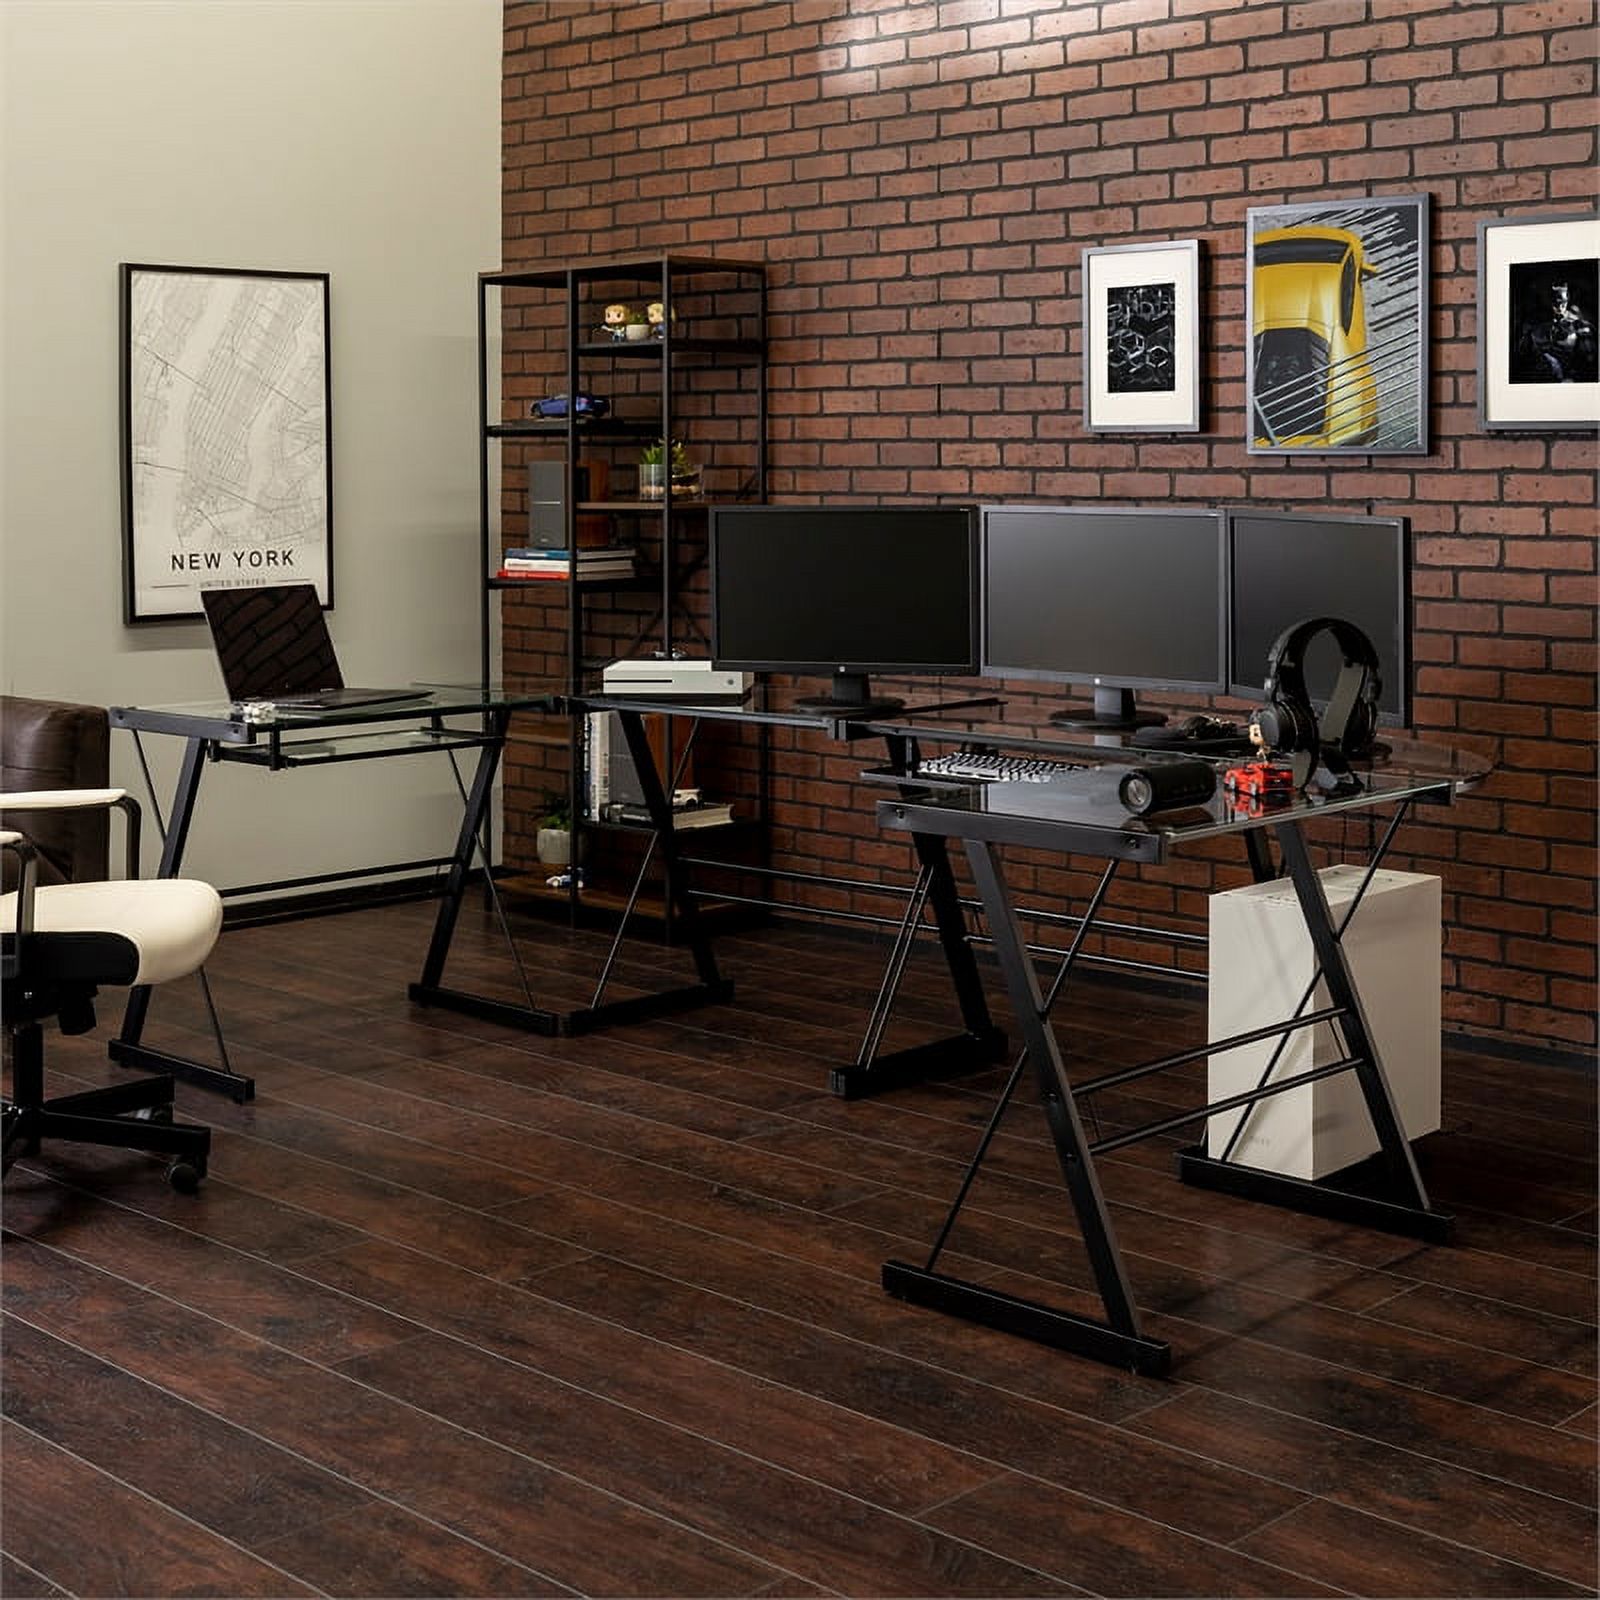 Contemporary Z-Frame Command Center Computer and Gaming Desk - Black - image 9 of 12